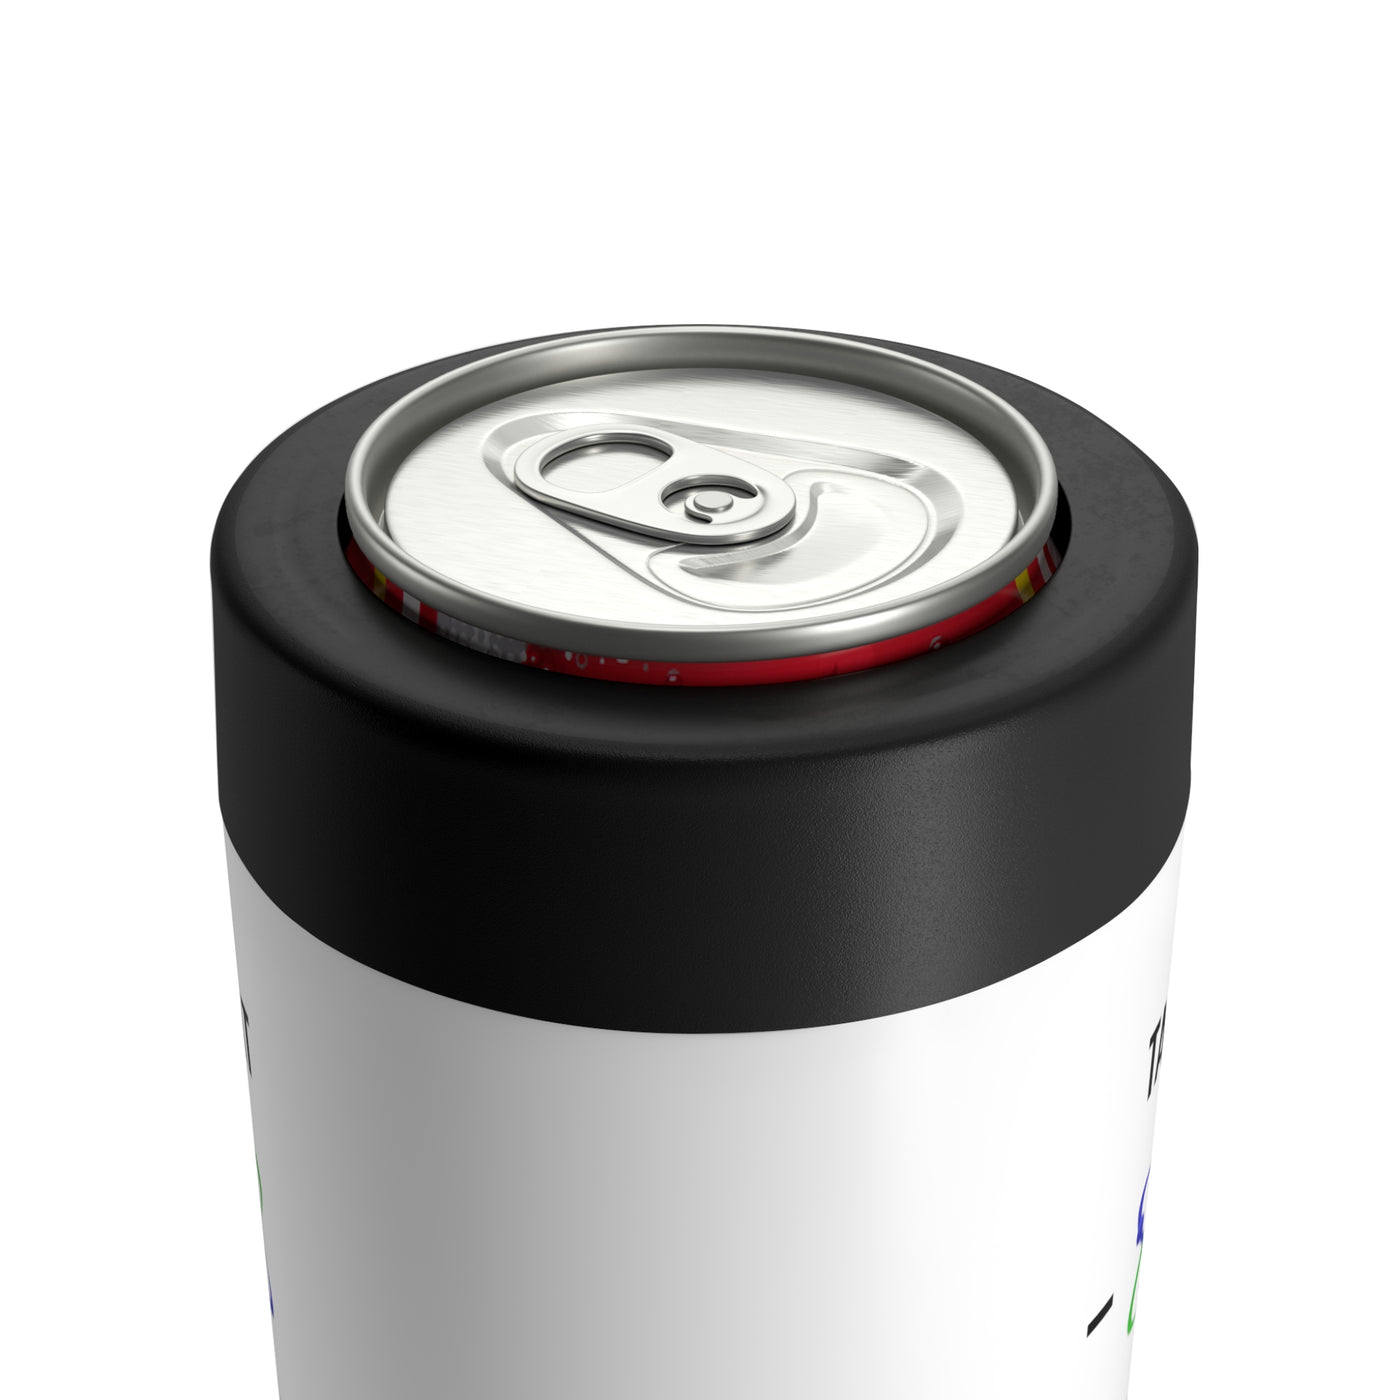 No Negative Energy Stainless Steel Can Holder